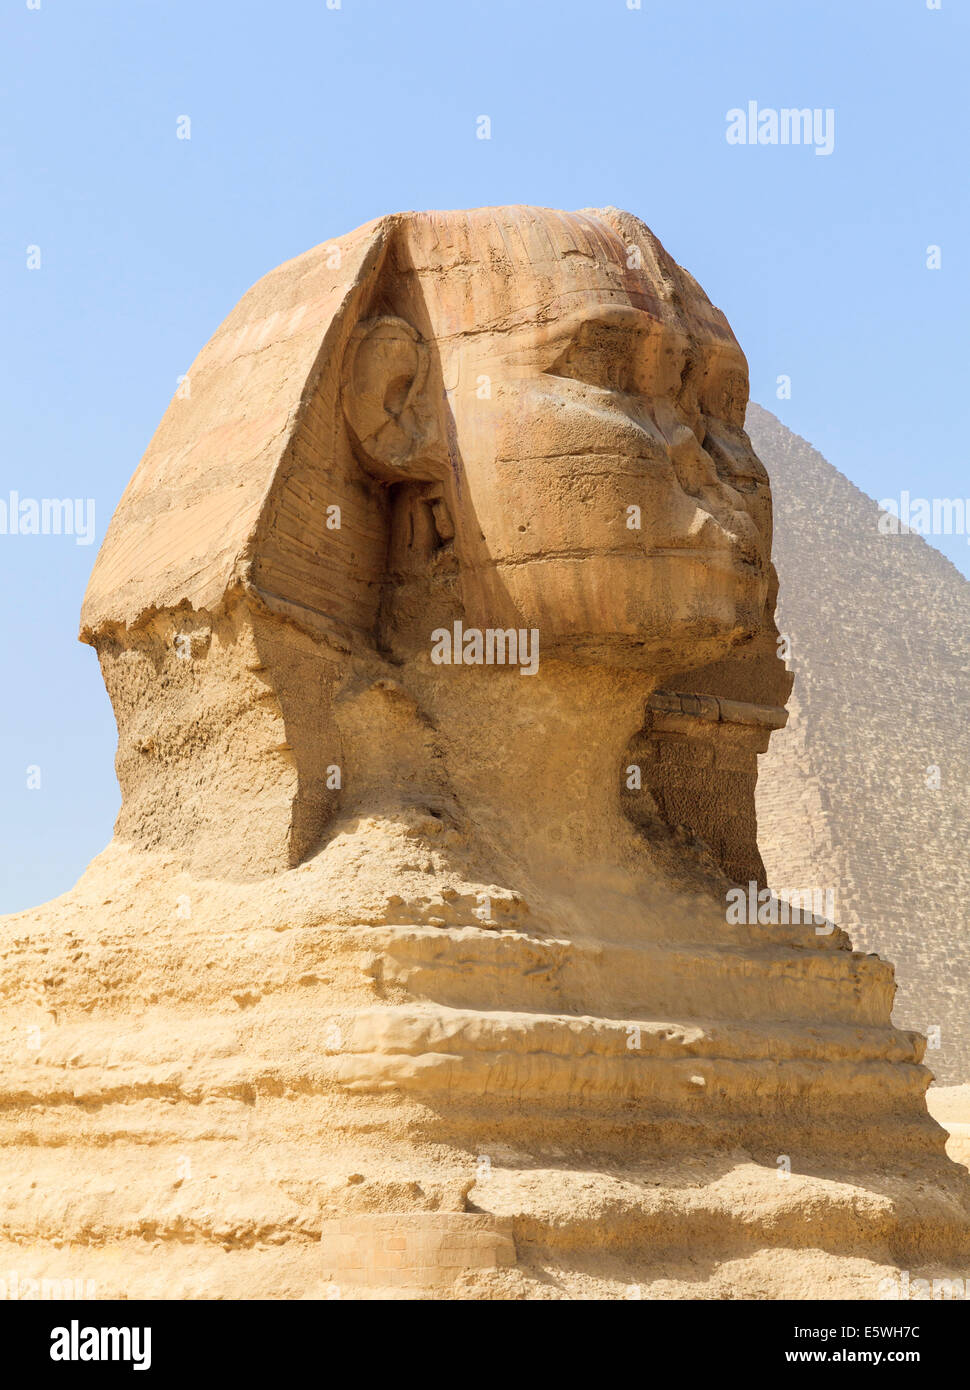 The Sphinx at the Pyramids of Giza in Cairo, Egypt with Great Pyramid in background Stock Photo